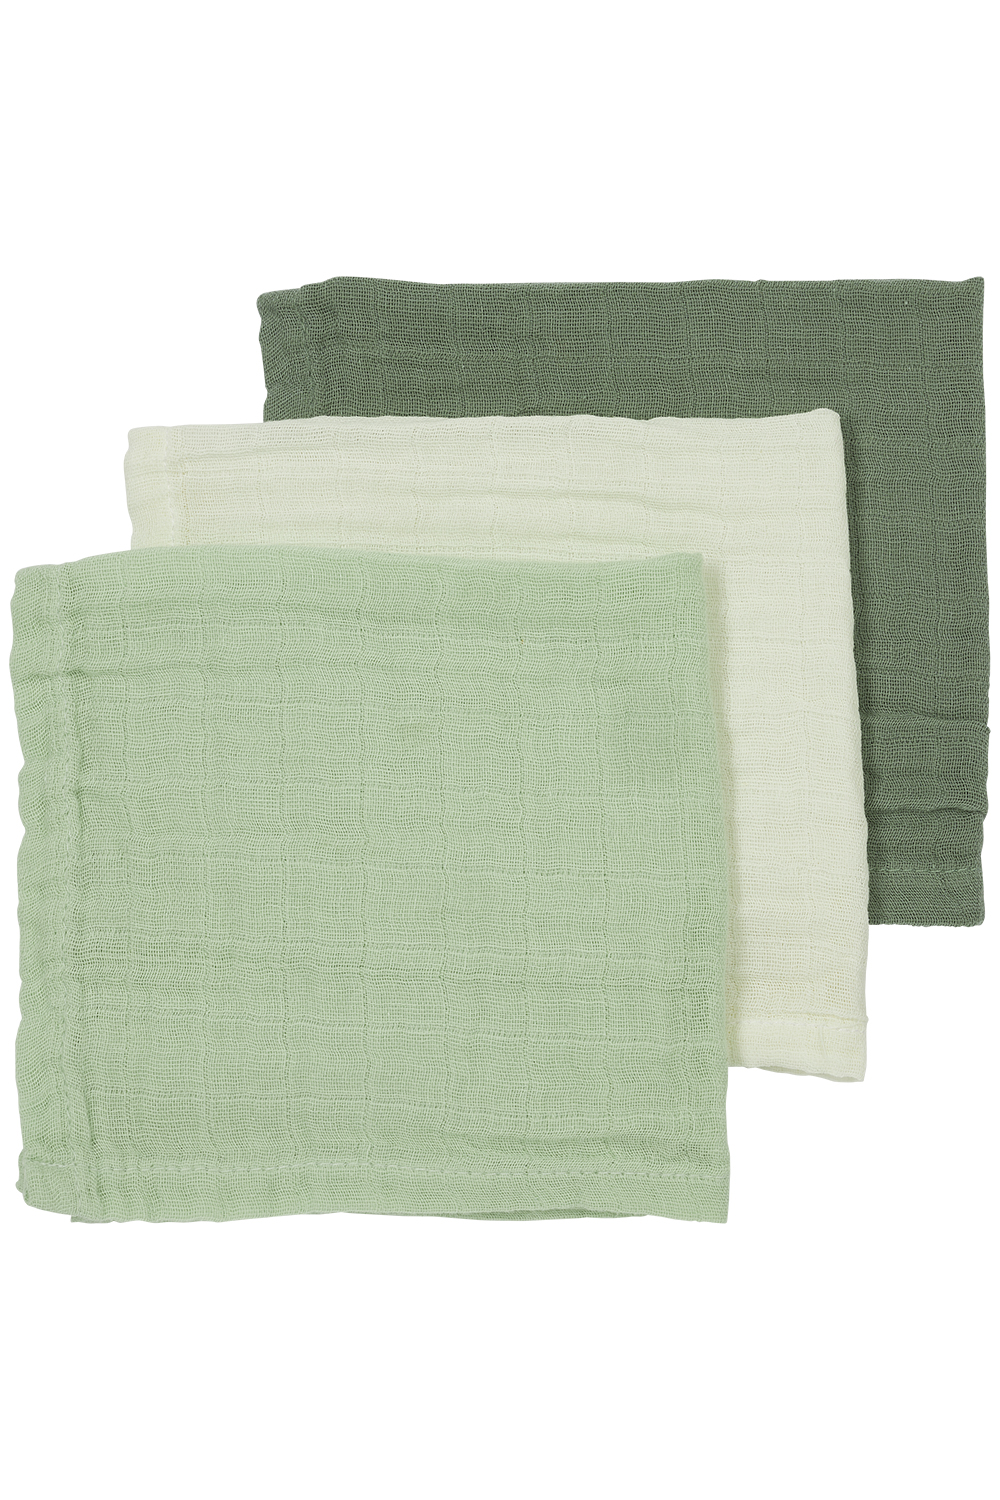 Facecloth 3-pack muslin Uni - offwhite/soft green/forest green - 30x30cm